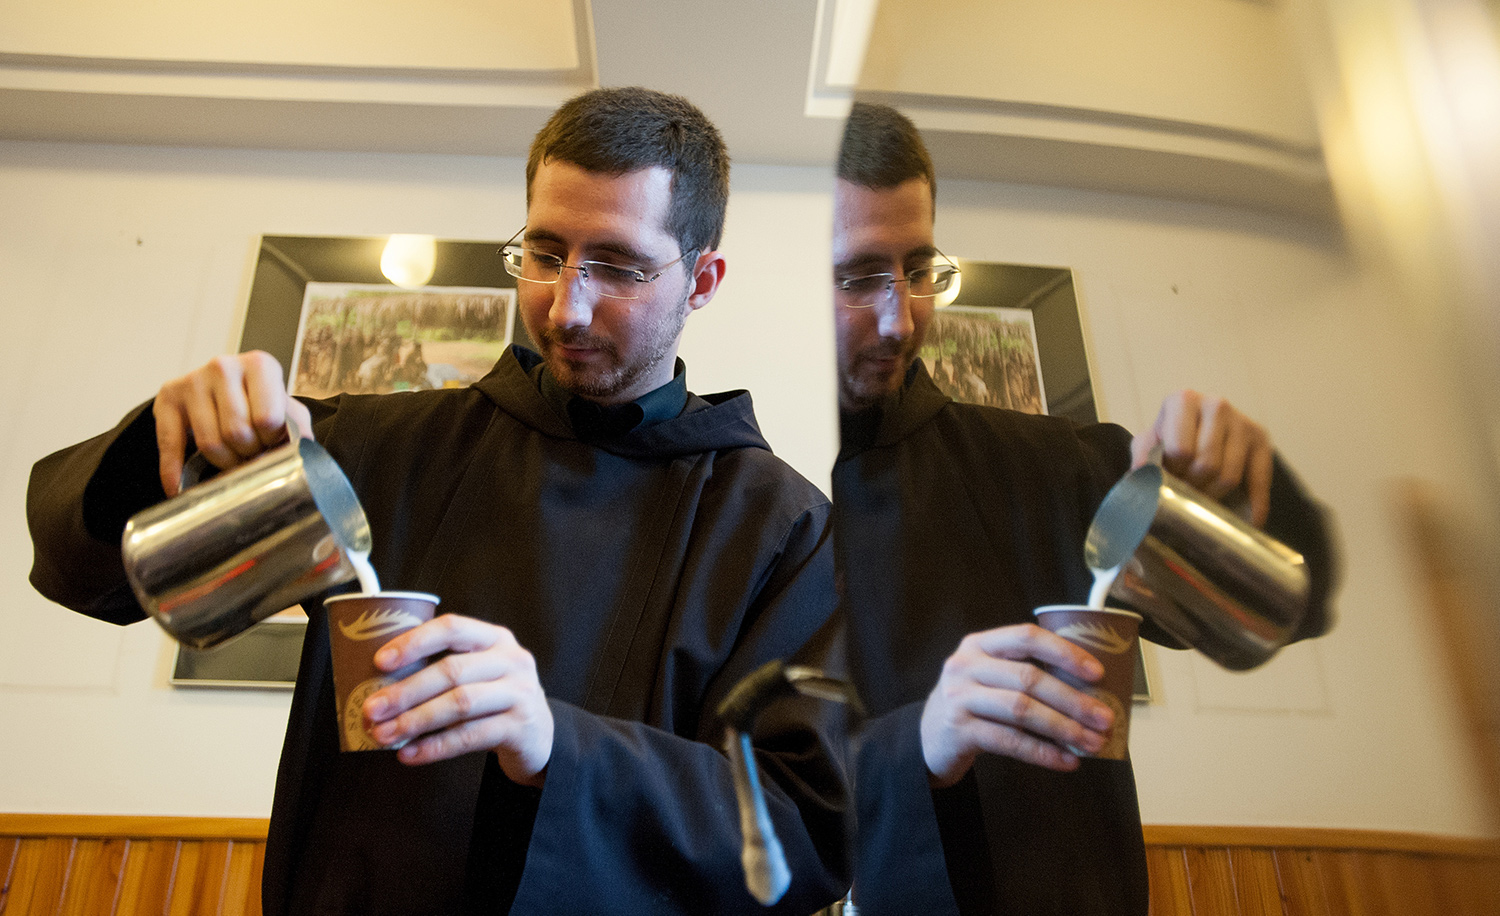 A Capuchin monk making a cappuccino in Krakow, Poland, on January 6, 2013. BARTOSZ SIEDLIK/AFP/Getty Images.
